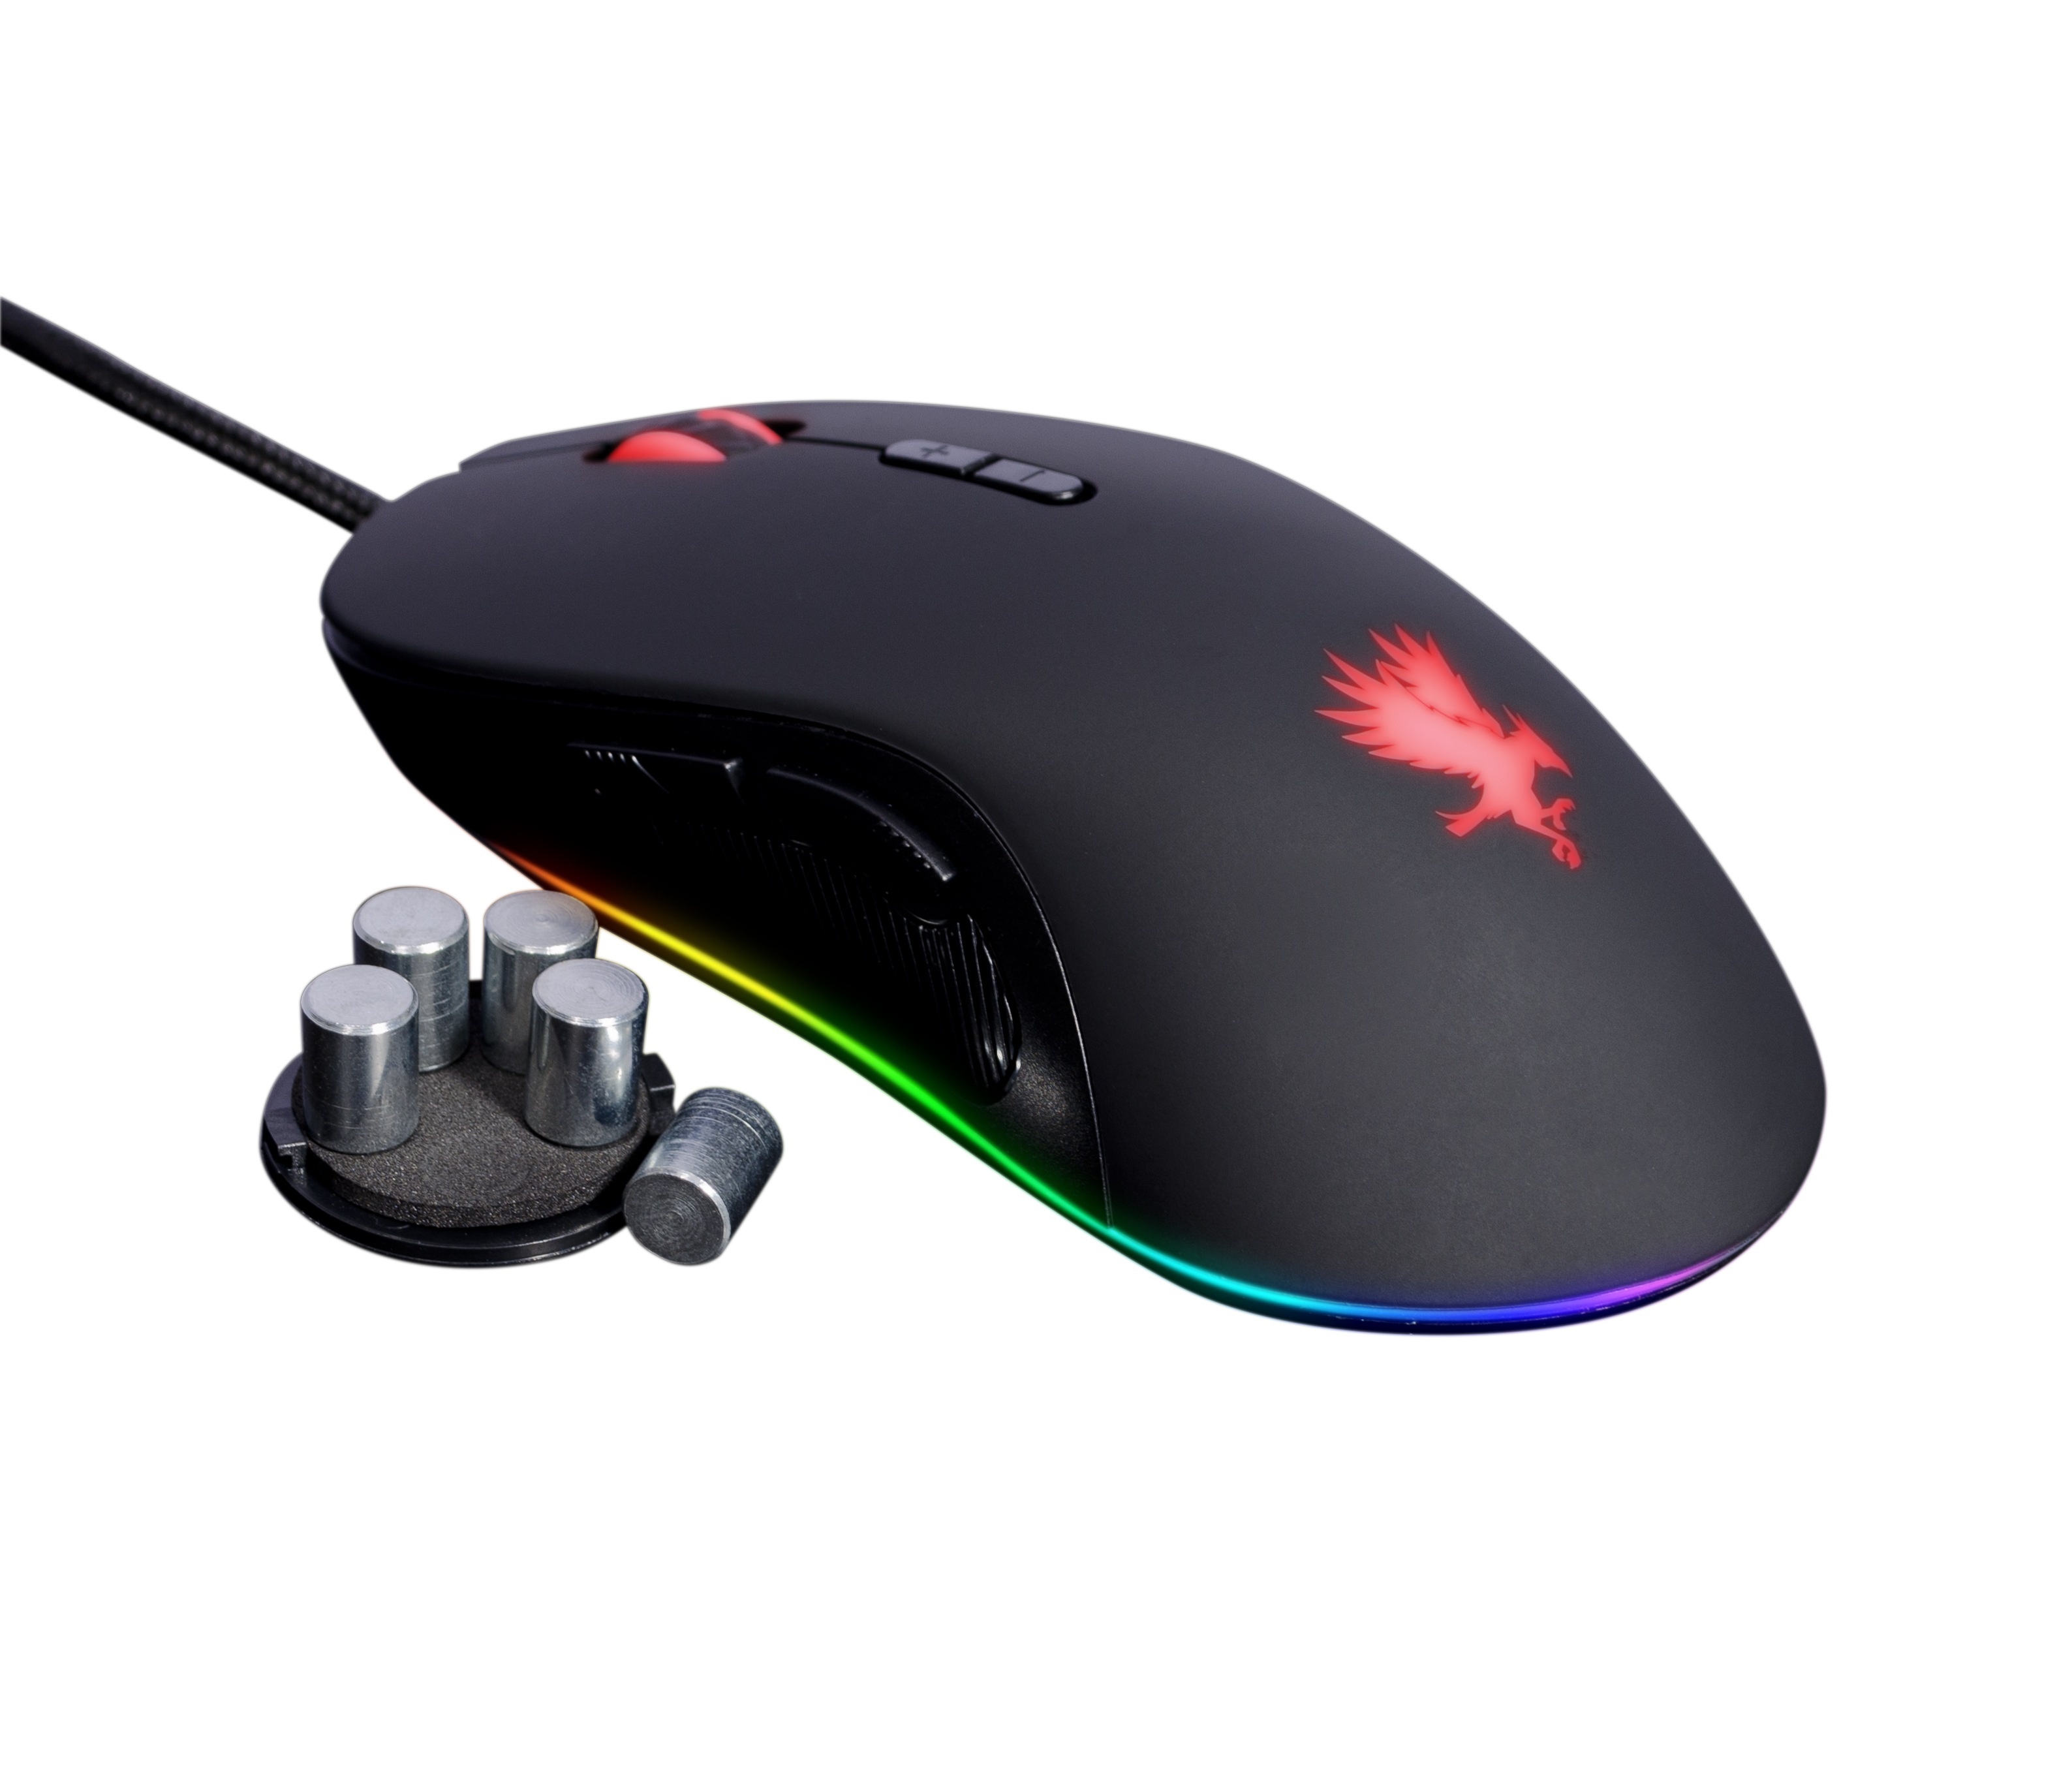 Digifast Nightfall NF12 RGB Gaming Mouse, Adjustable Weight, 20 Million Click Durability, 7 Programmable Buttons, Dynamic RGB, Customizable Color, DPI